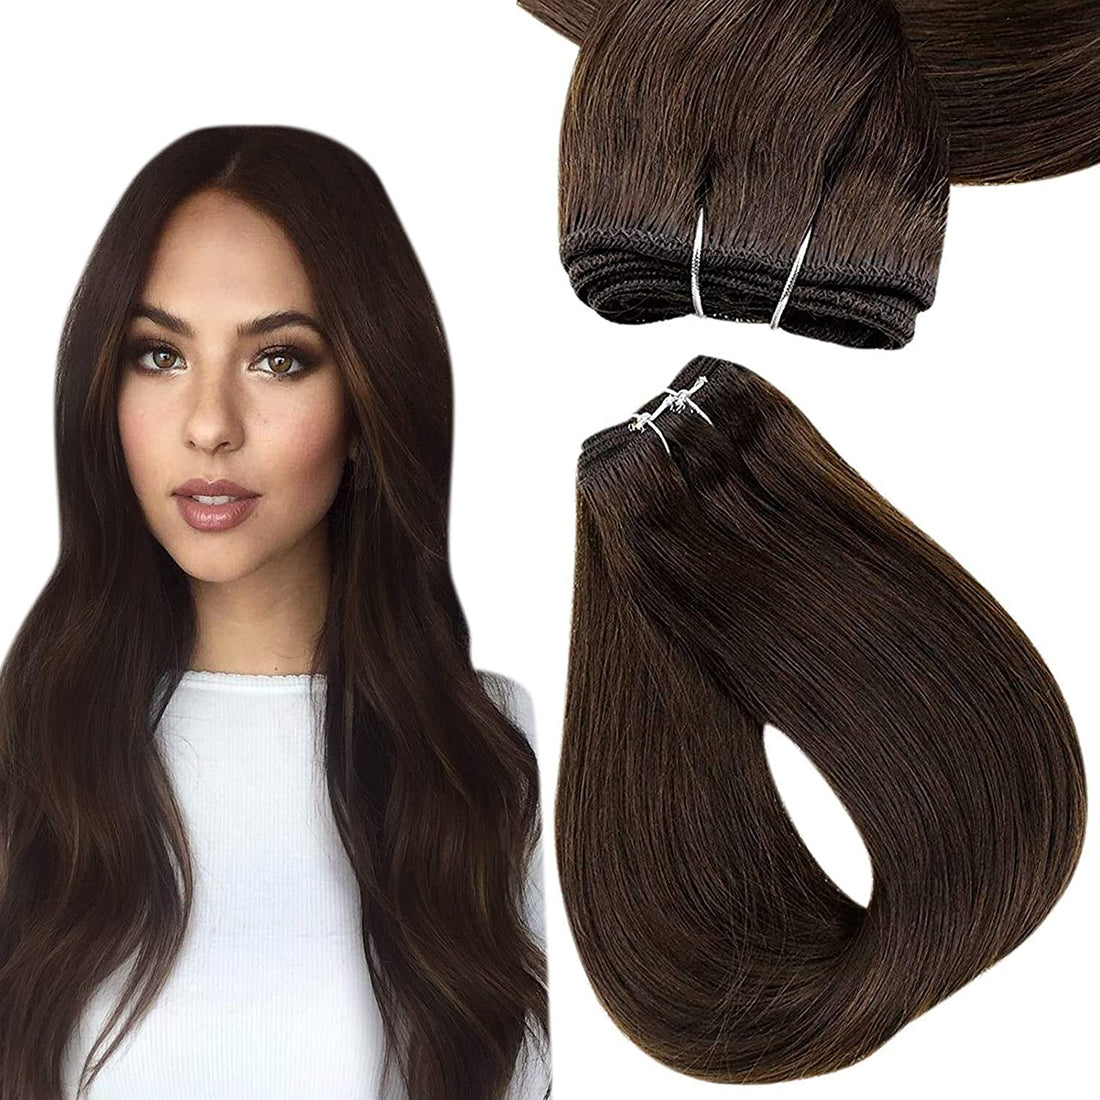 How much does it cost to get permanent hair extensions near me? We Supply Your Hair